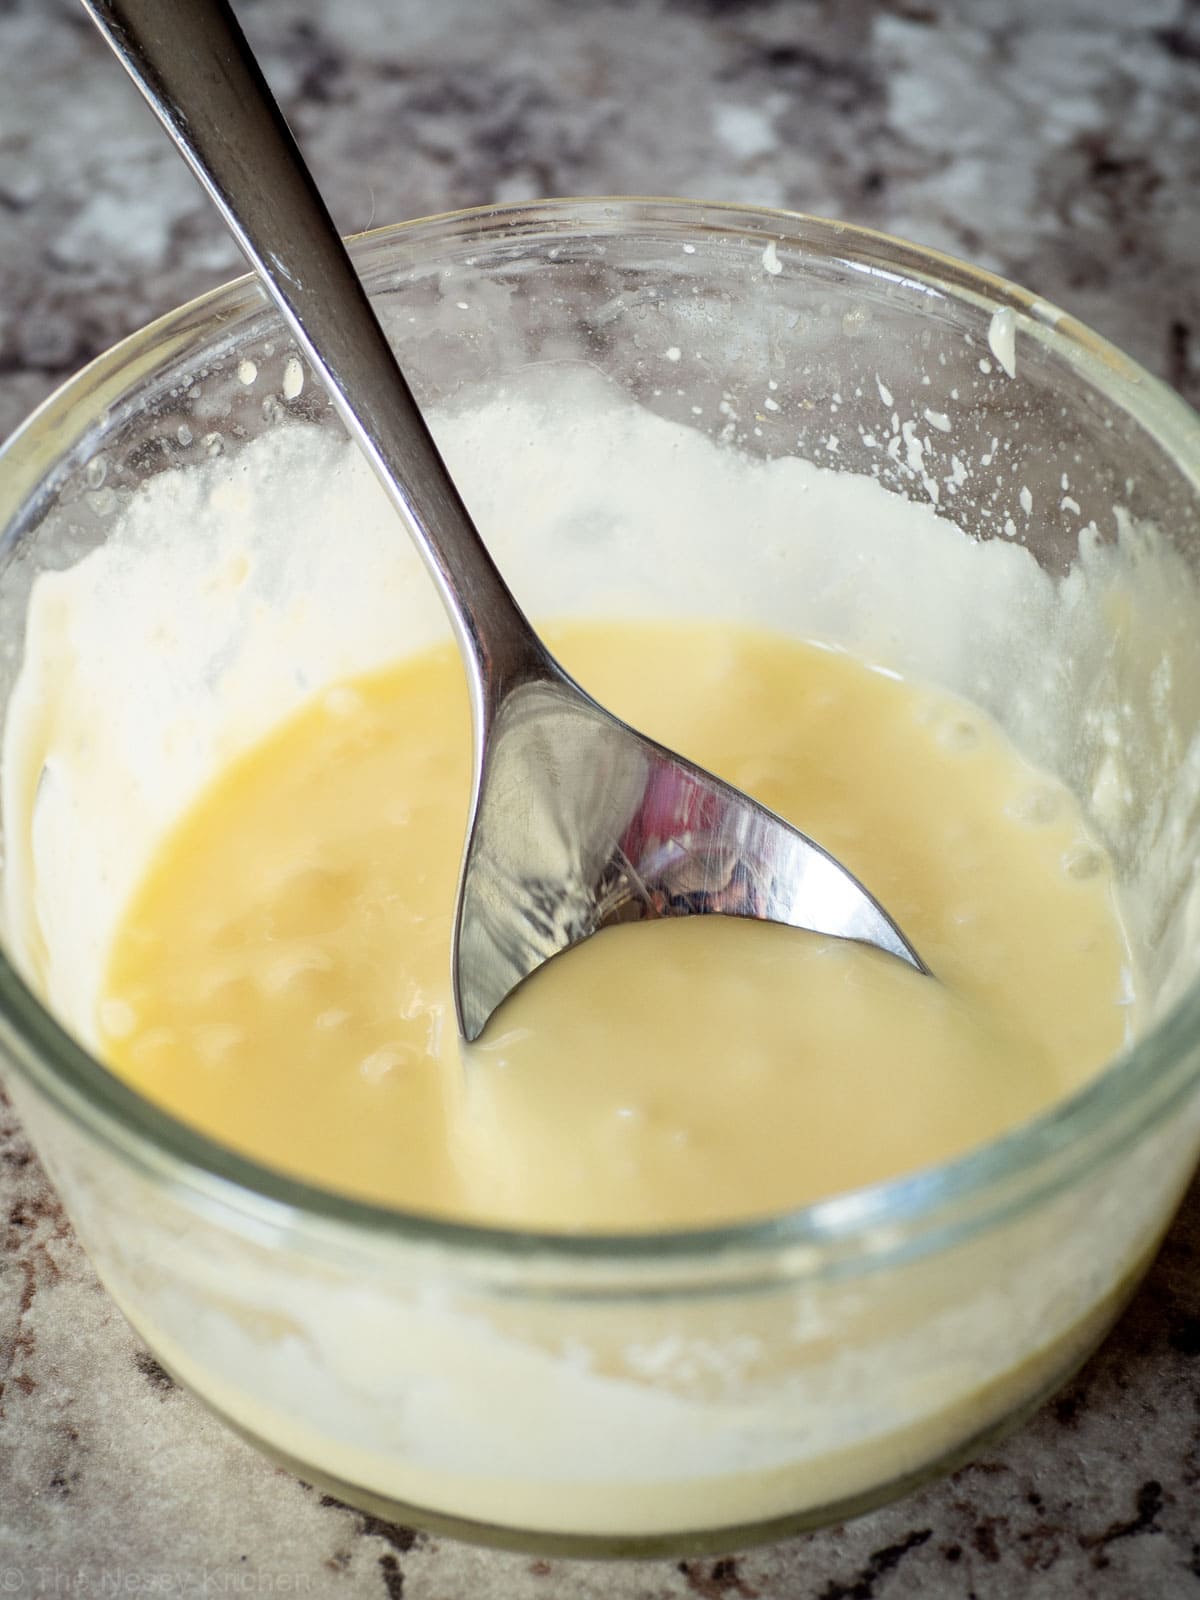 Small dish of Hollandaise sauce with a spoon in it.